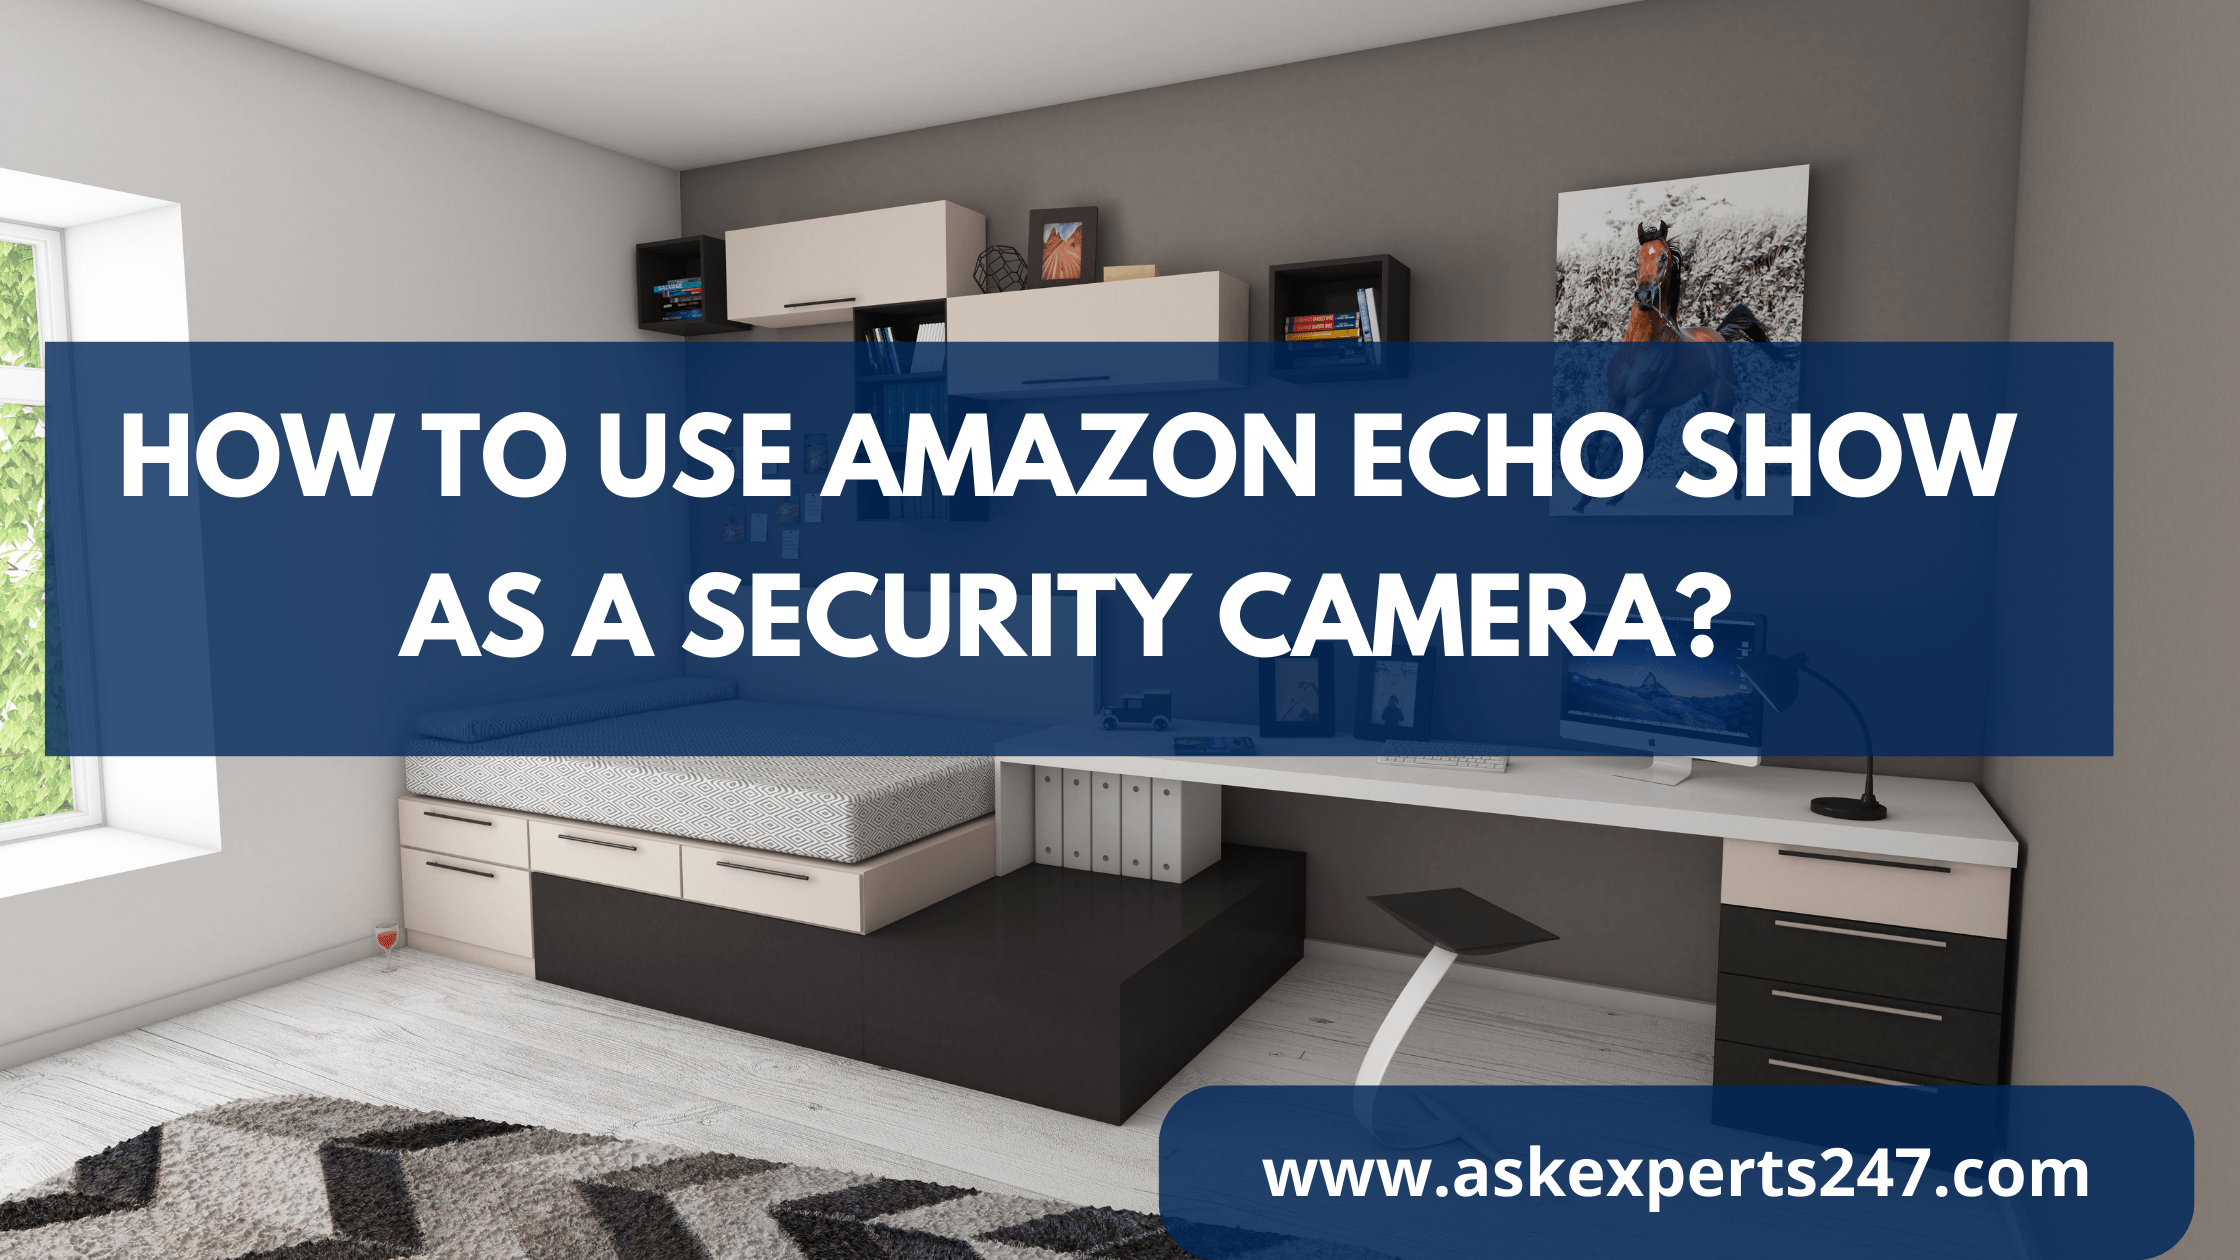 How to use Amazon echo show as a Security camera